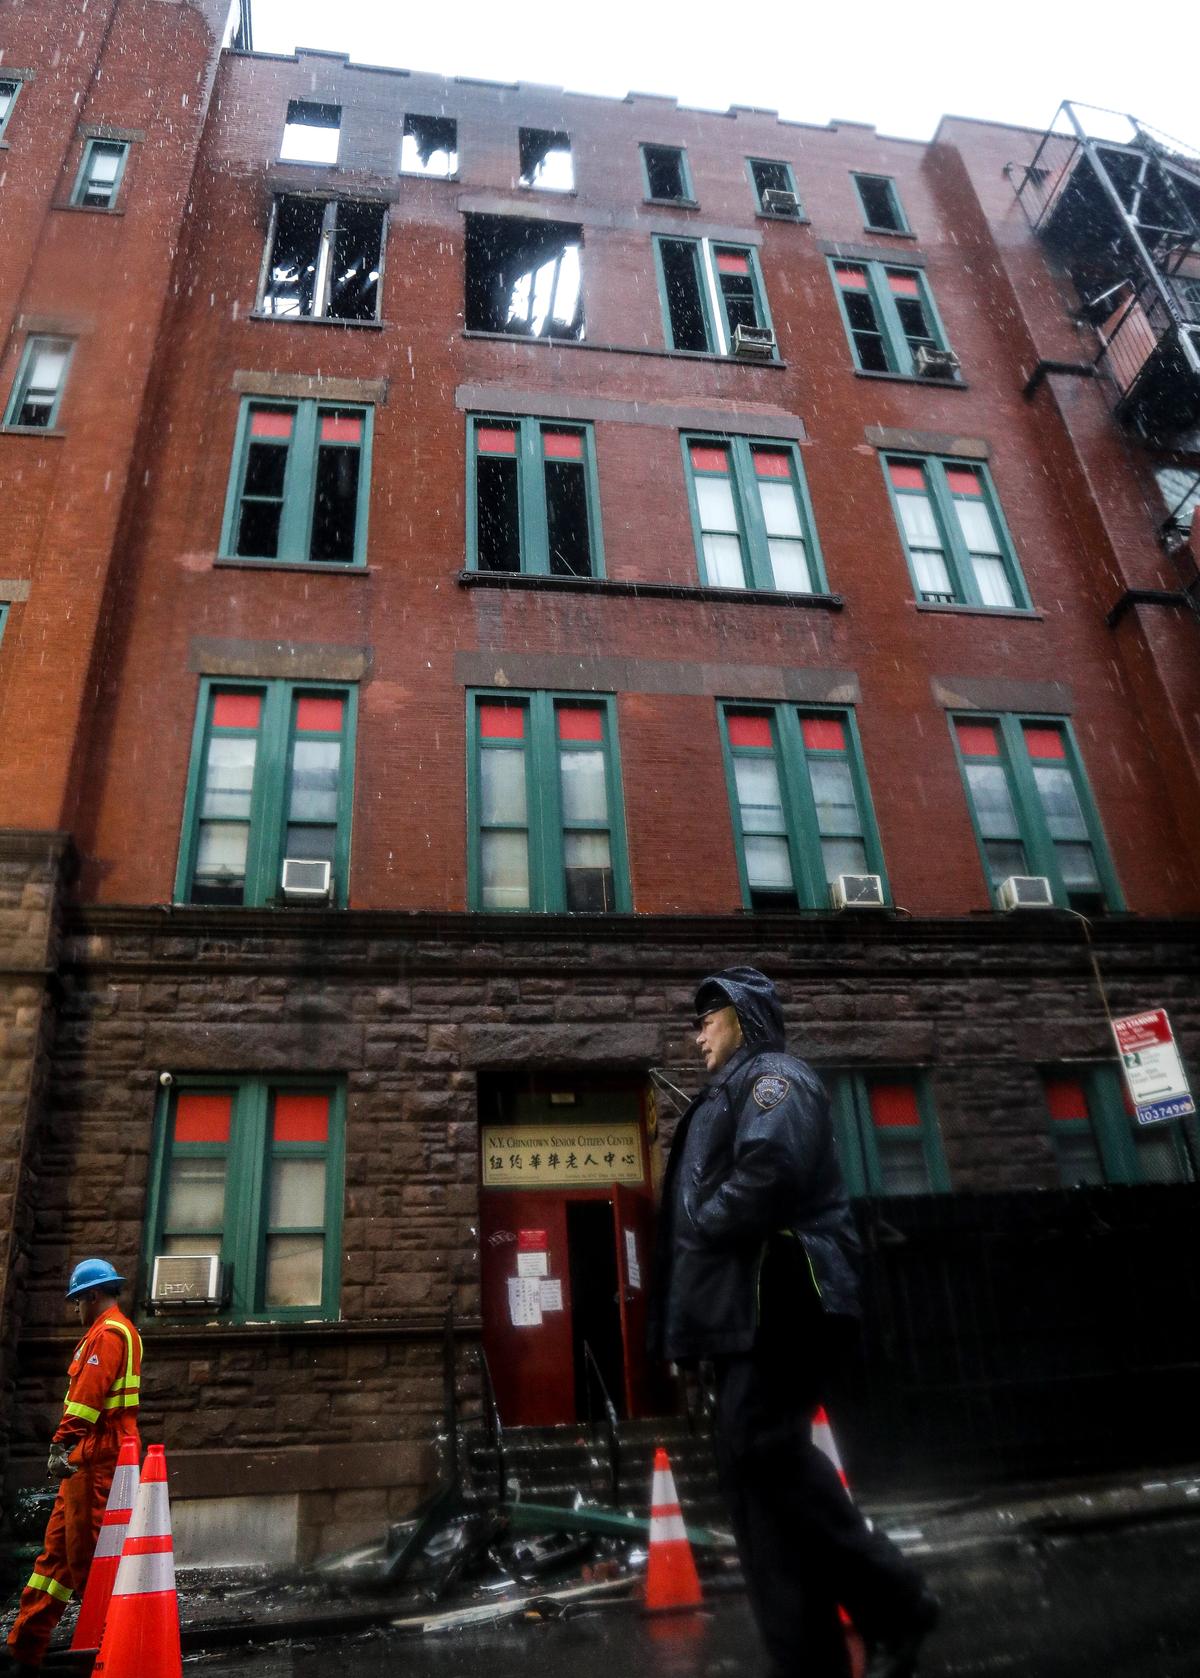 A police officer patrols the scene outside a building that housed the archive of the Museum of Chinese in America, destroyed by fire in New York's Chinatown AP Photo/Bebeto Matthews